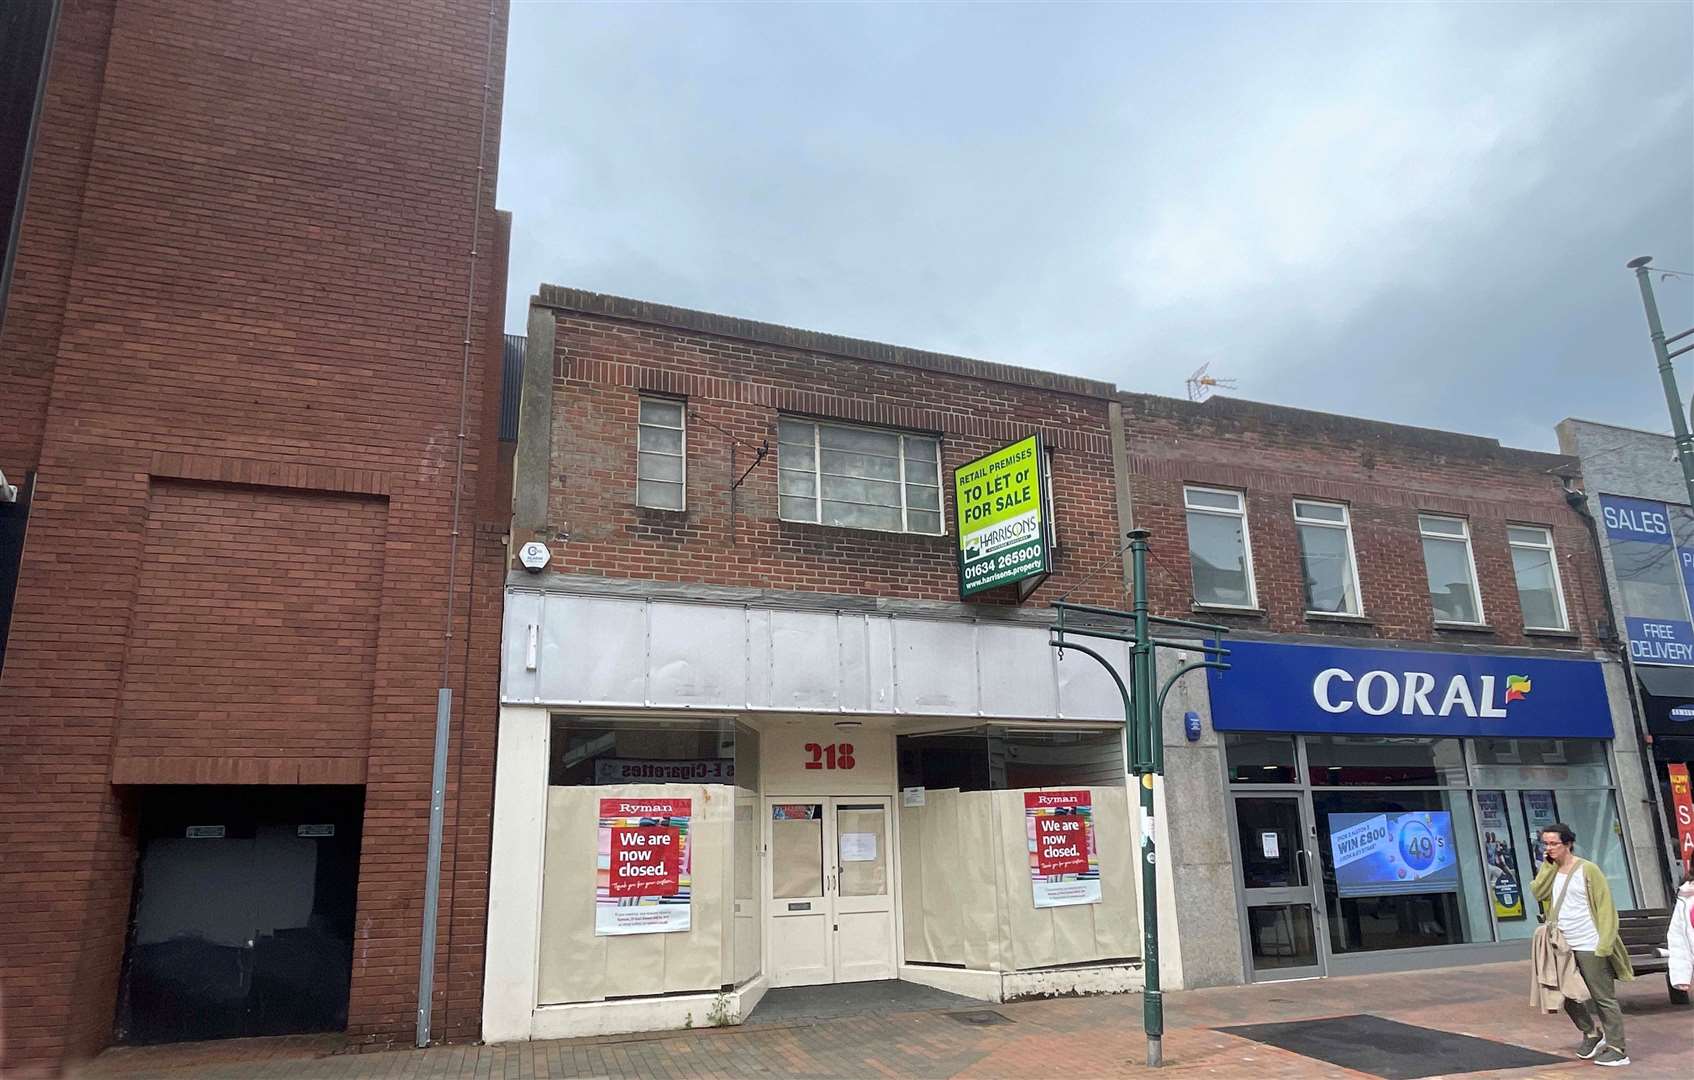 This empty shop next to the vacant department store in Chatham High Street is for sale at auction